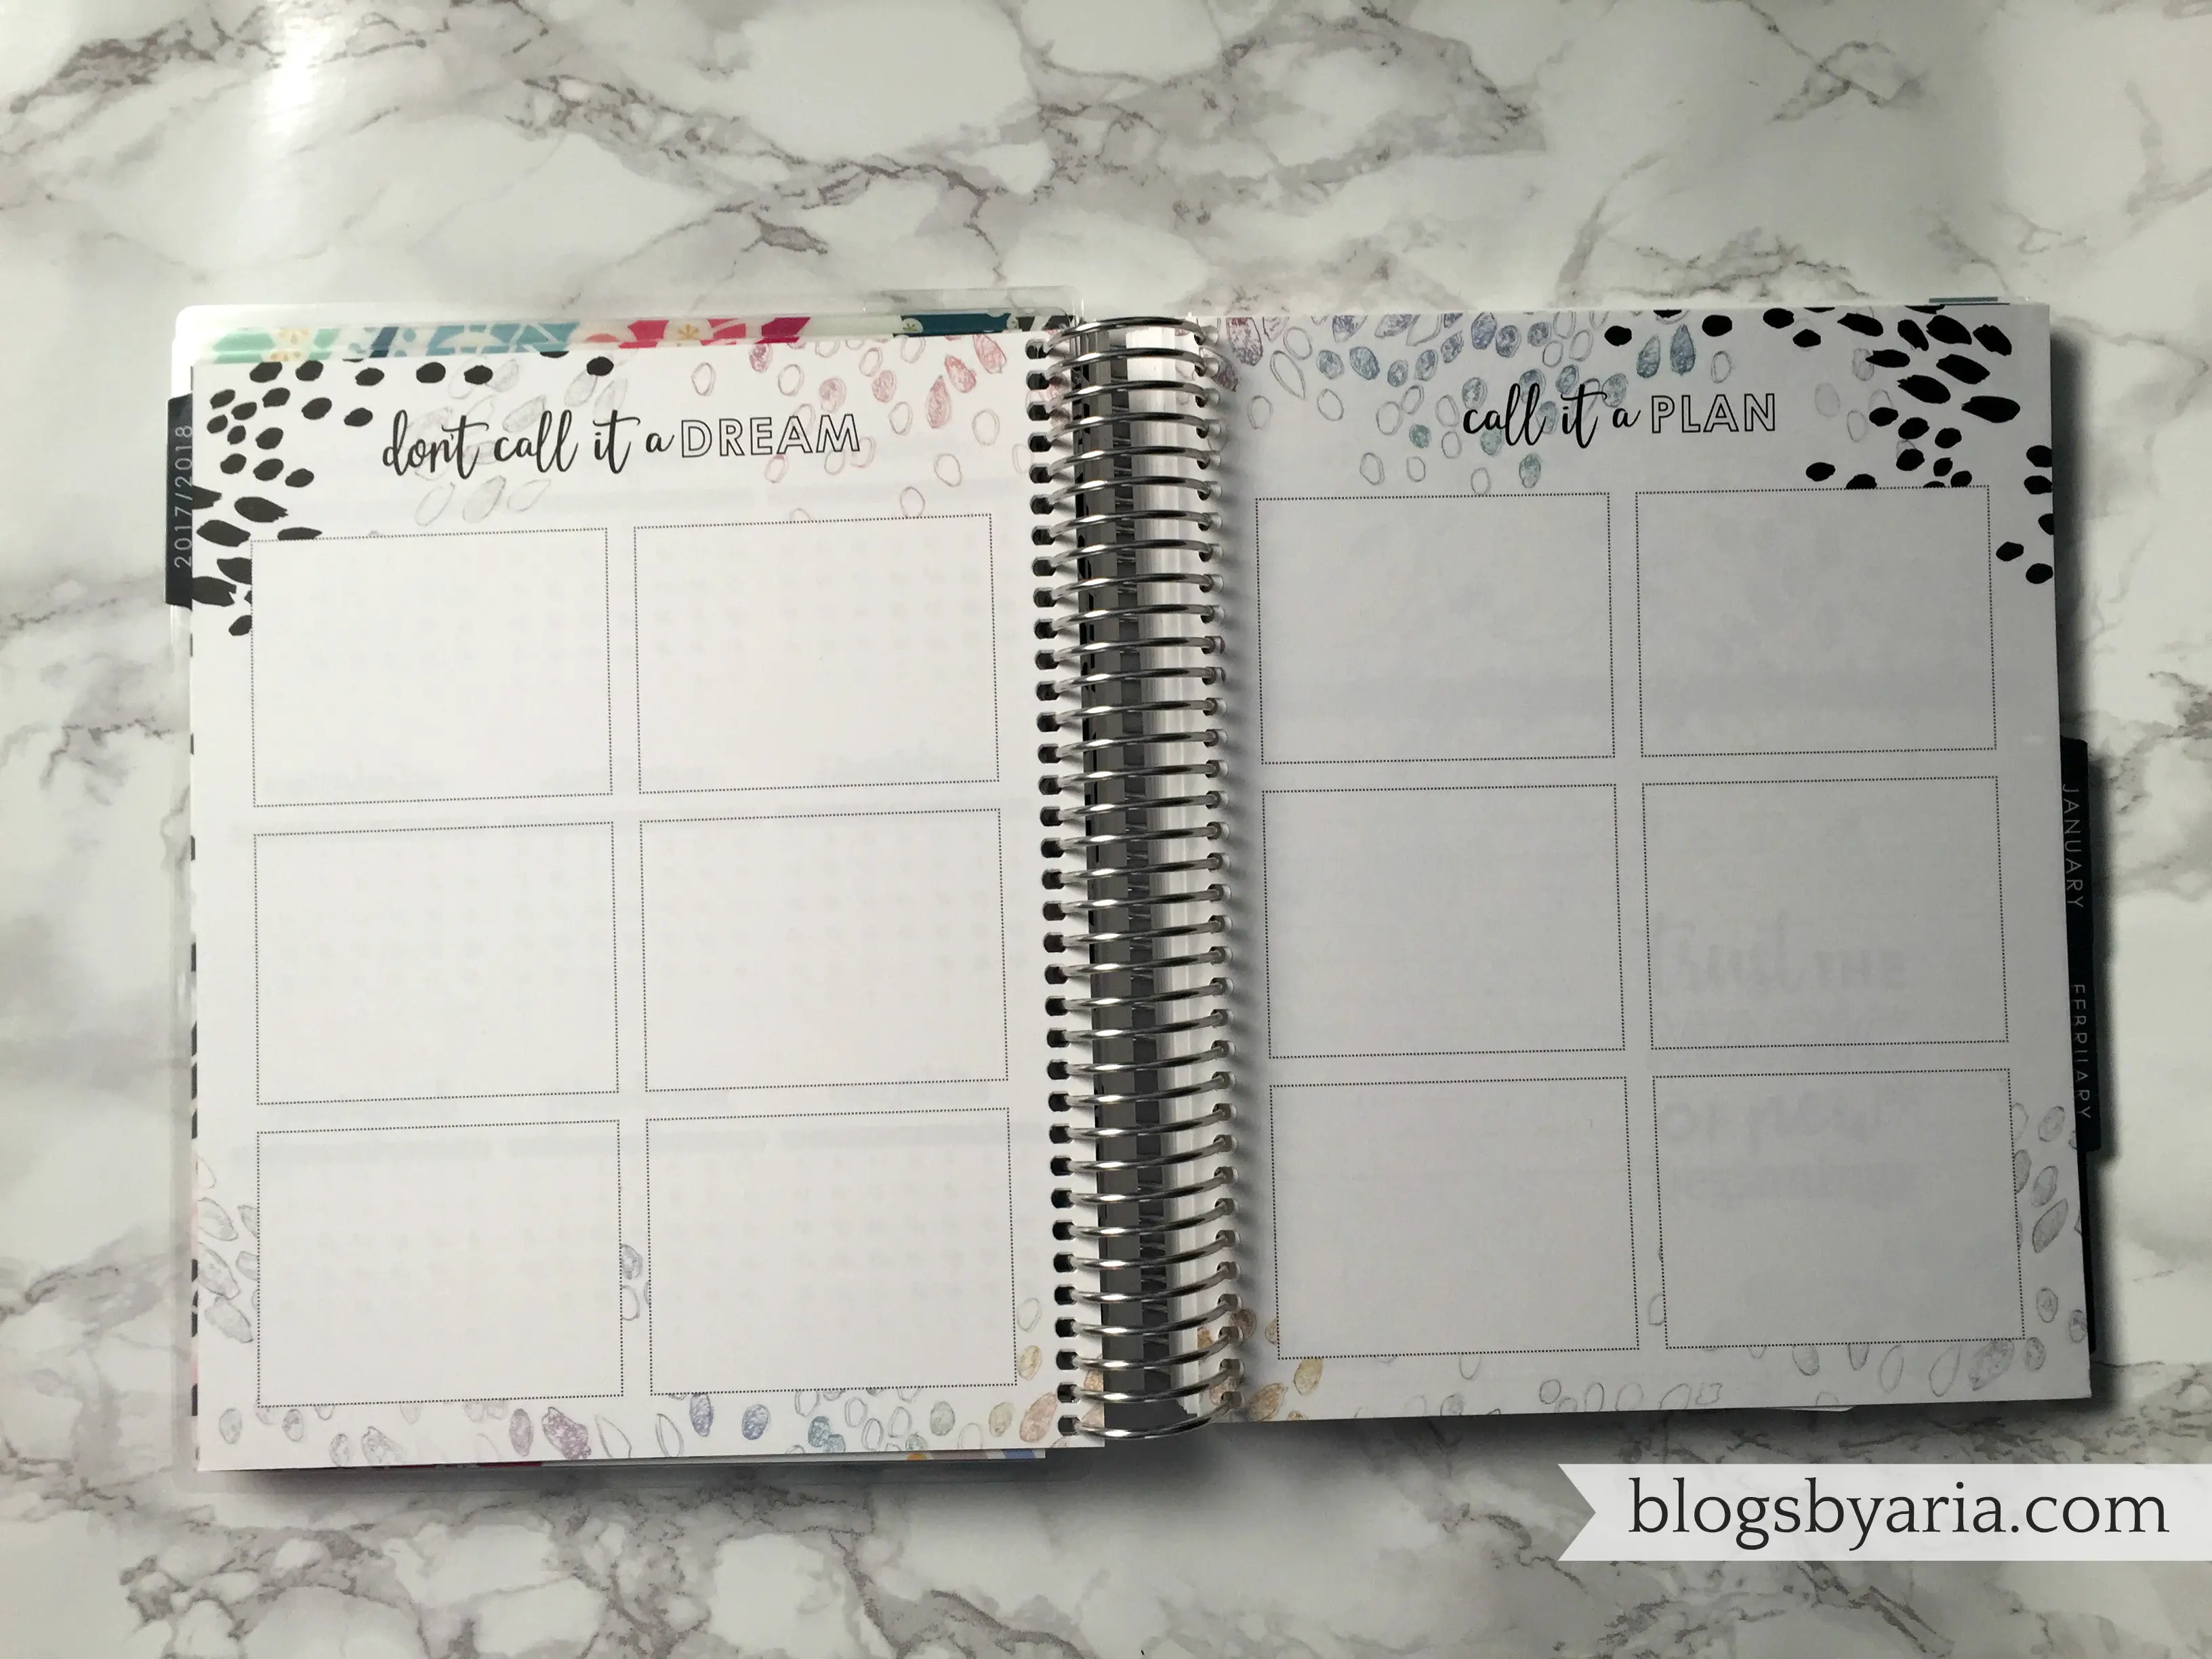 Make Goals -- Prepping Your Planner for the New Year